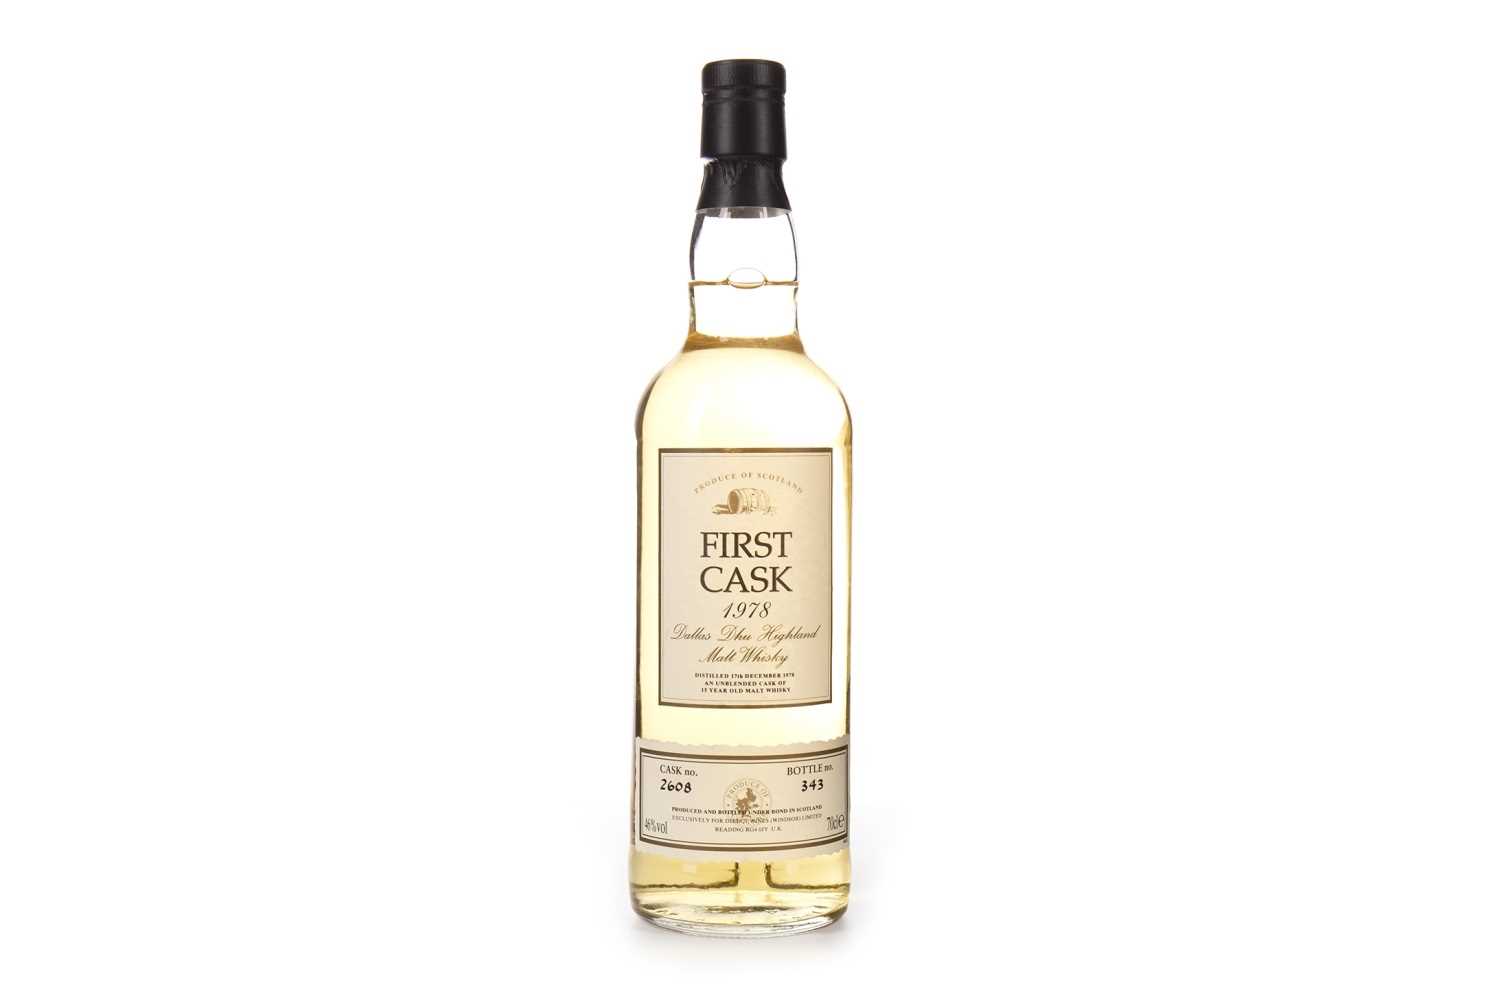 Lot 26 - DALLAS DHU 1978 FIRST CASK AGED 15 YEARS